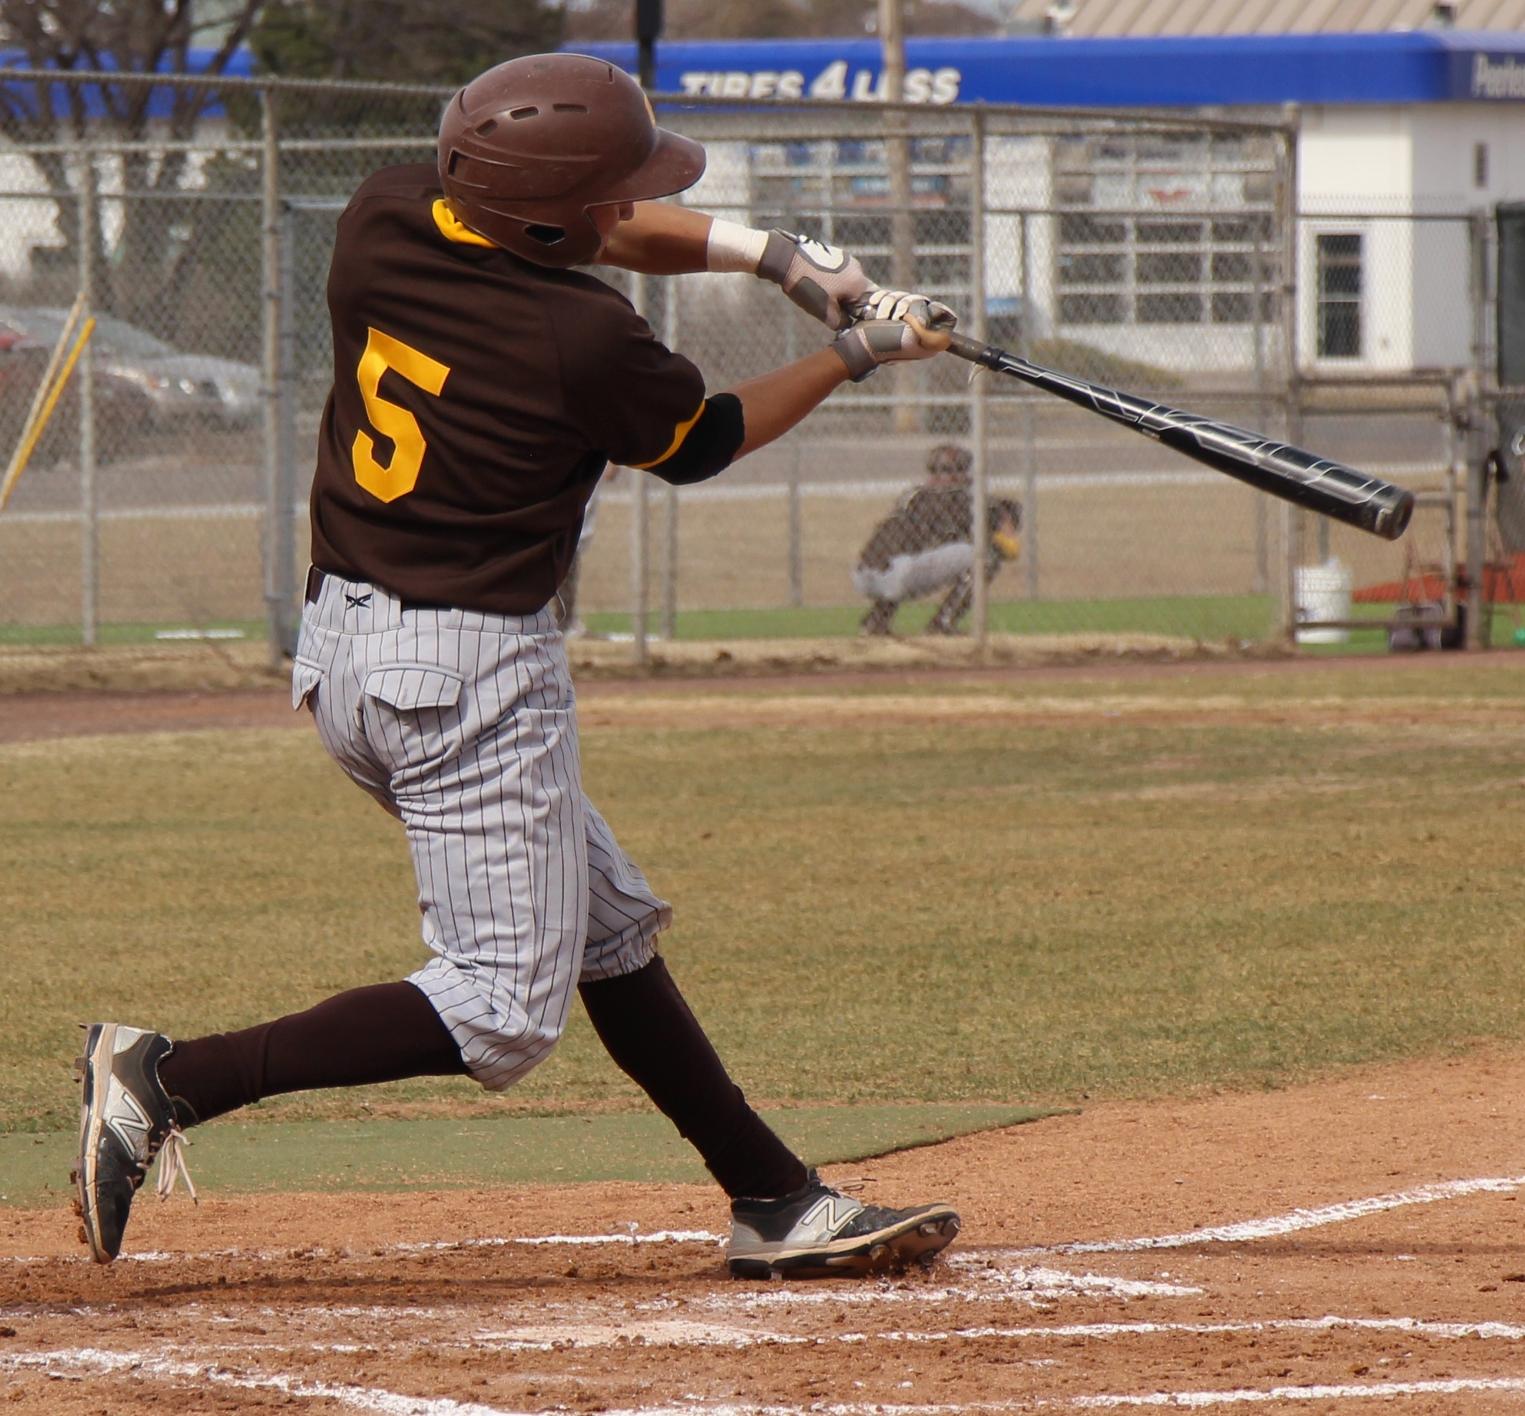 Busters Drop Game II to Indian Hills 8-6 in Extra Innings